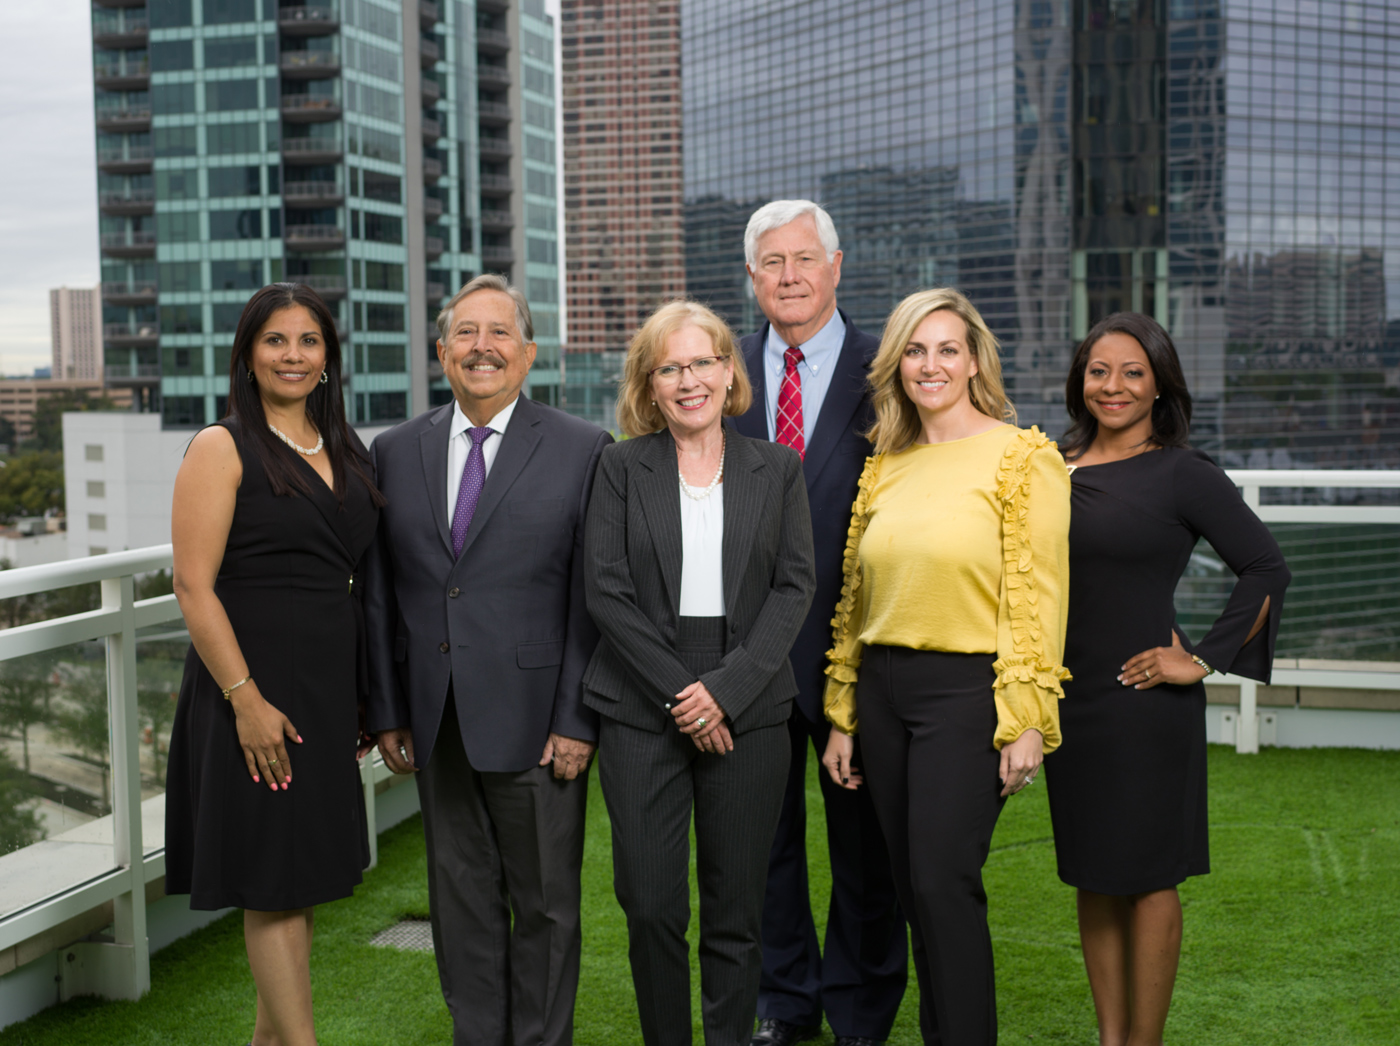 2019 HAR Executive Committee